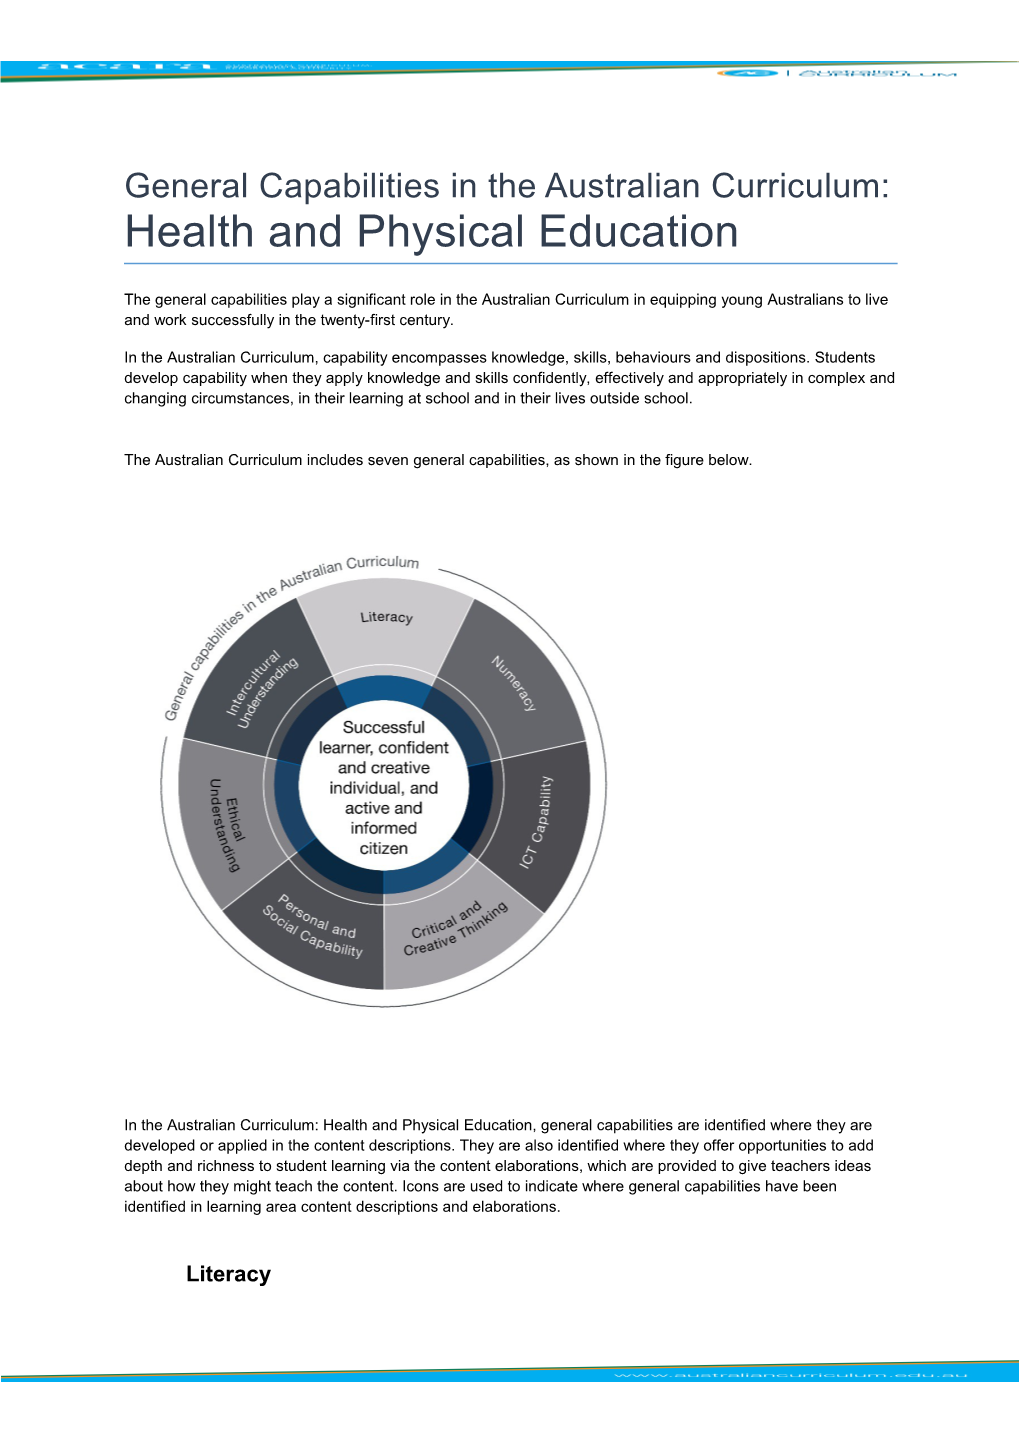 General Capabilities in the Australian Curriculum: Health and Physical Education